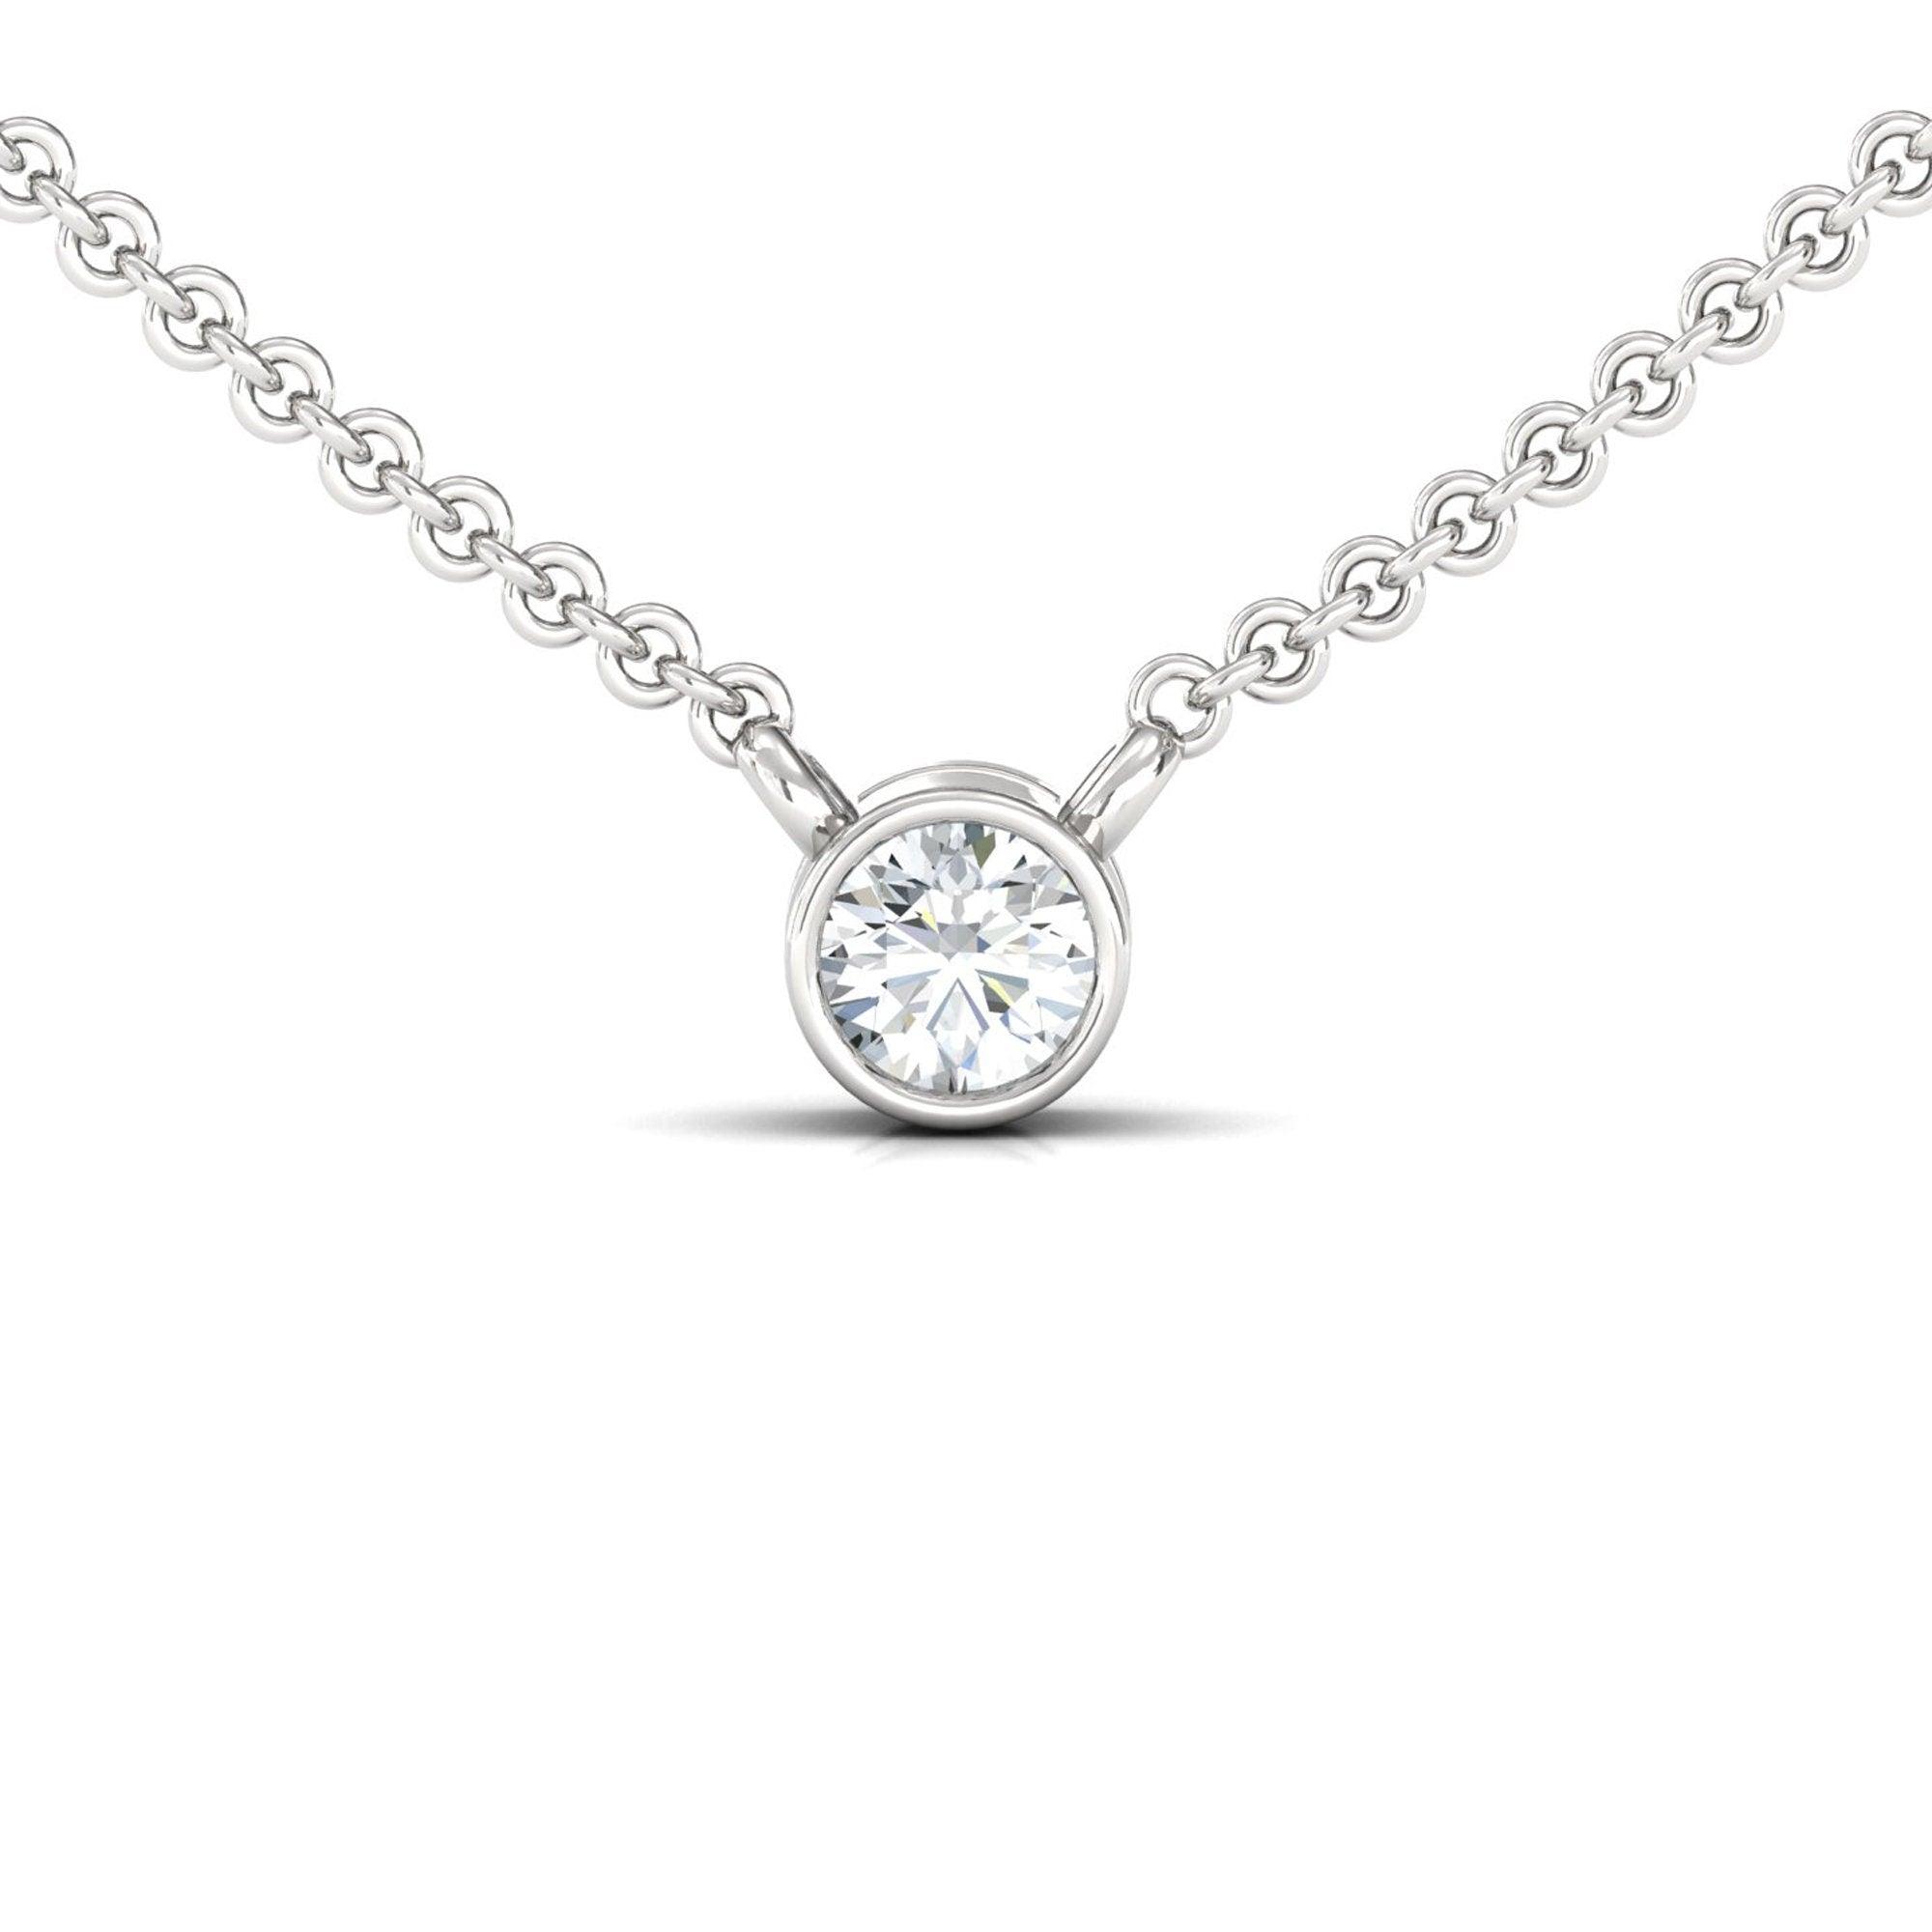 Handmade White Diamond Pendant, Real Rose Gold Bridesmaid Necklace, 10kt 14kt 18kt Yellow White Gold Pendant - GeumJewels